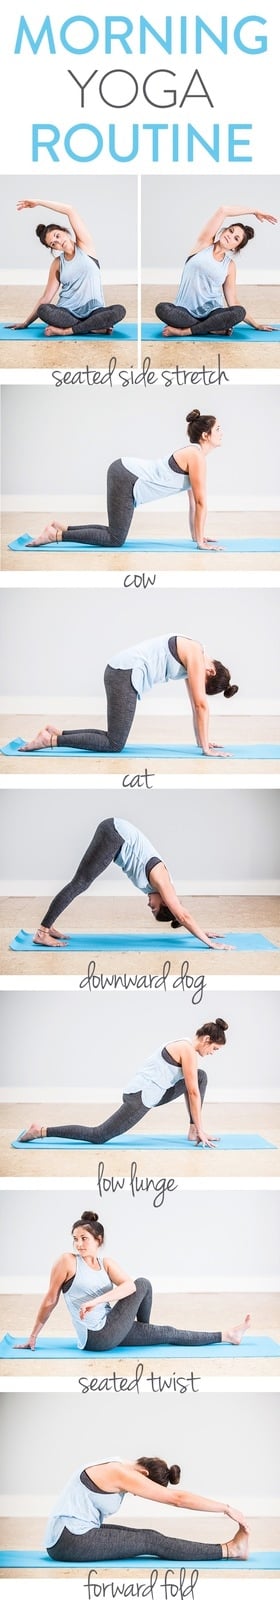 10 Minute Morning Yoga Routine graphic